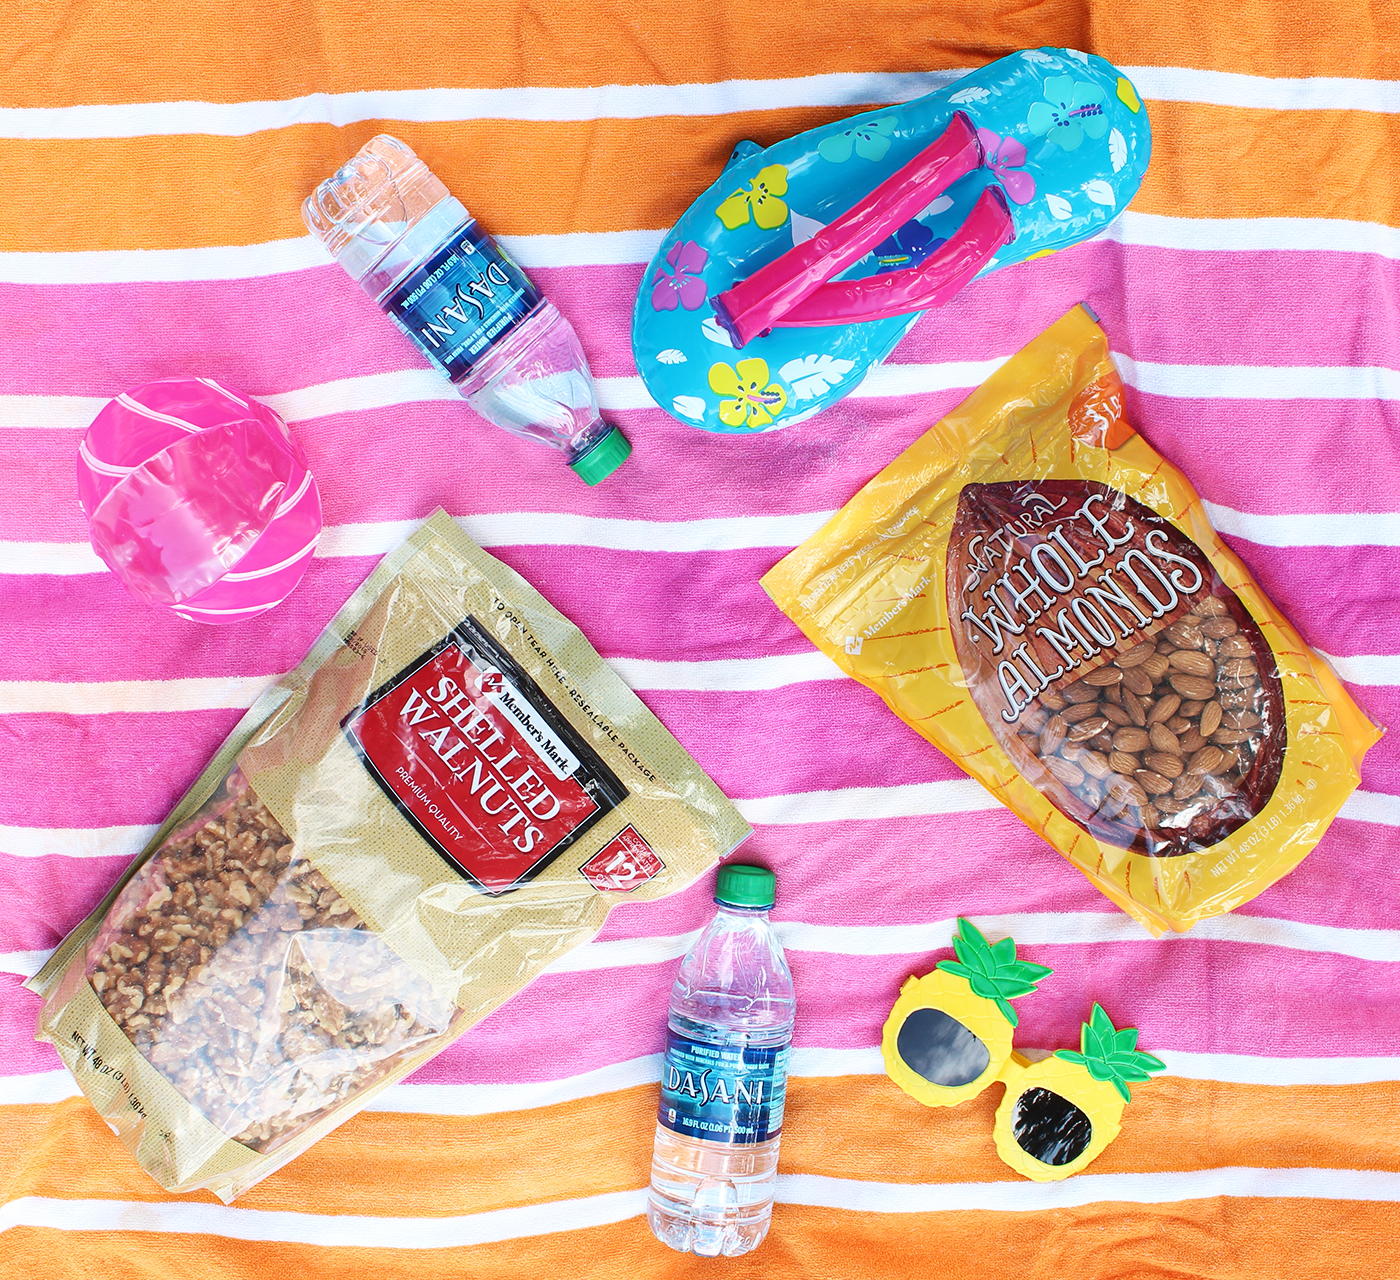 Beach Essentials: What to Pack for a Full Day at the Beach